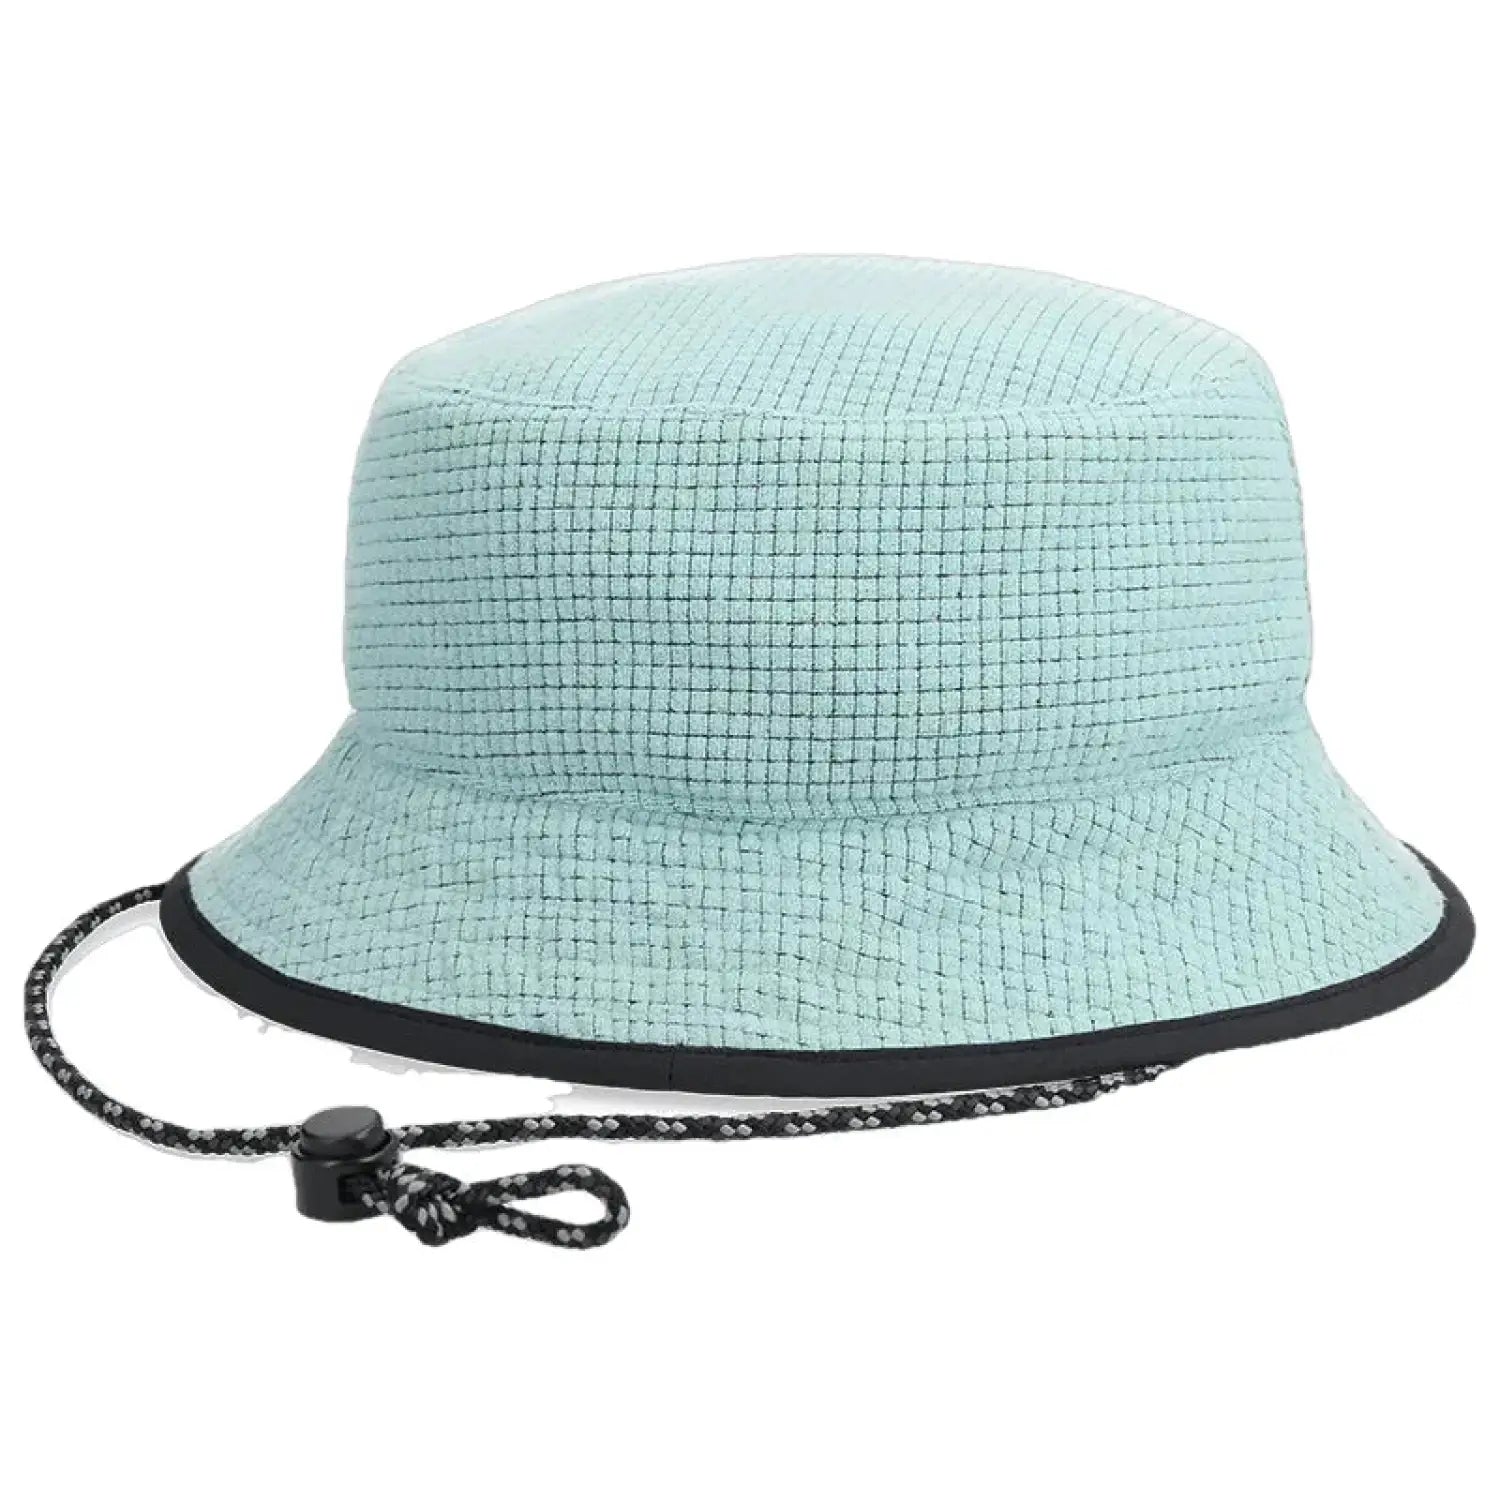 Outdoor Research Trail Mix Bucket Hat, Sage, back view 